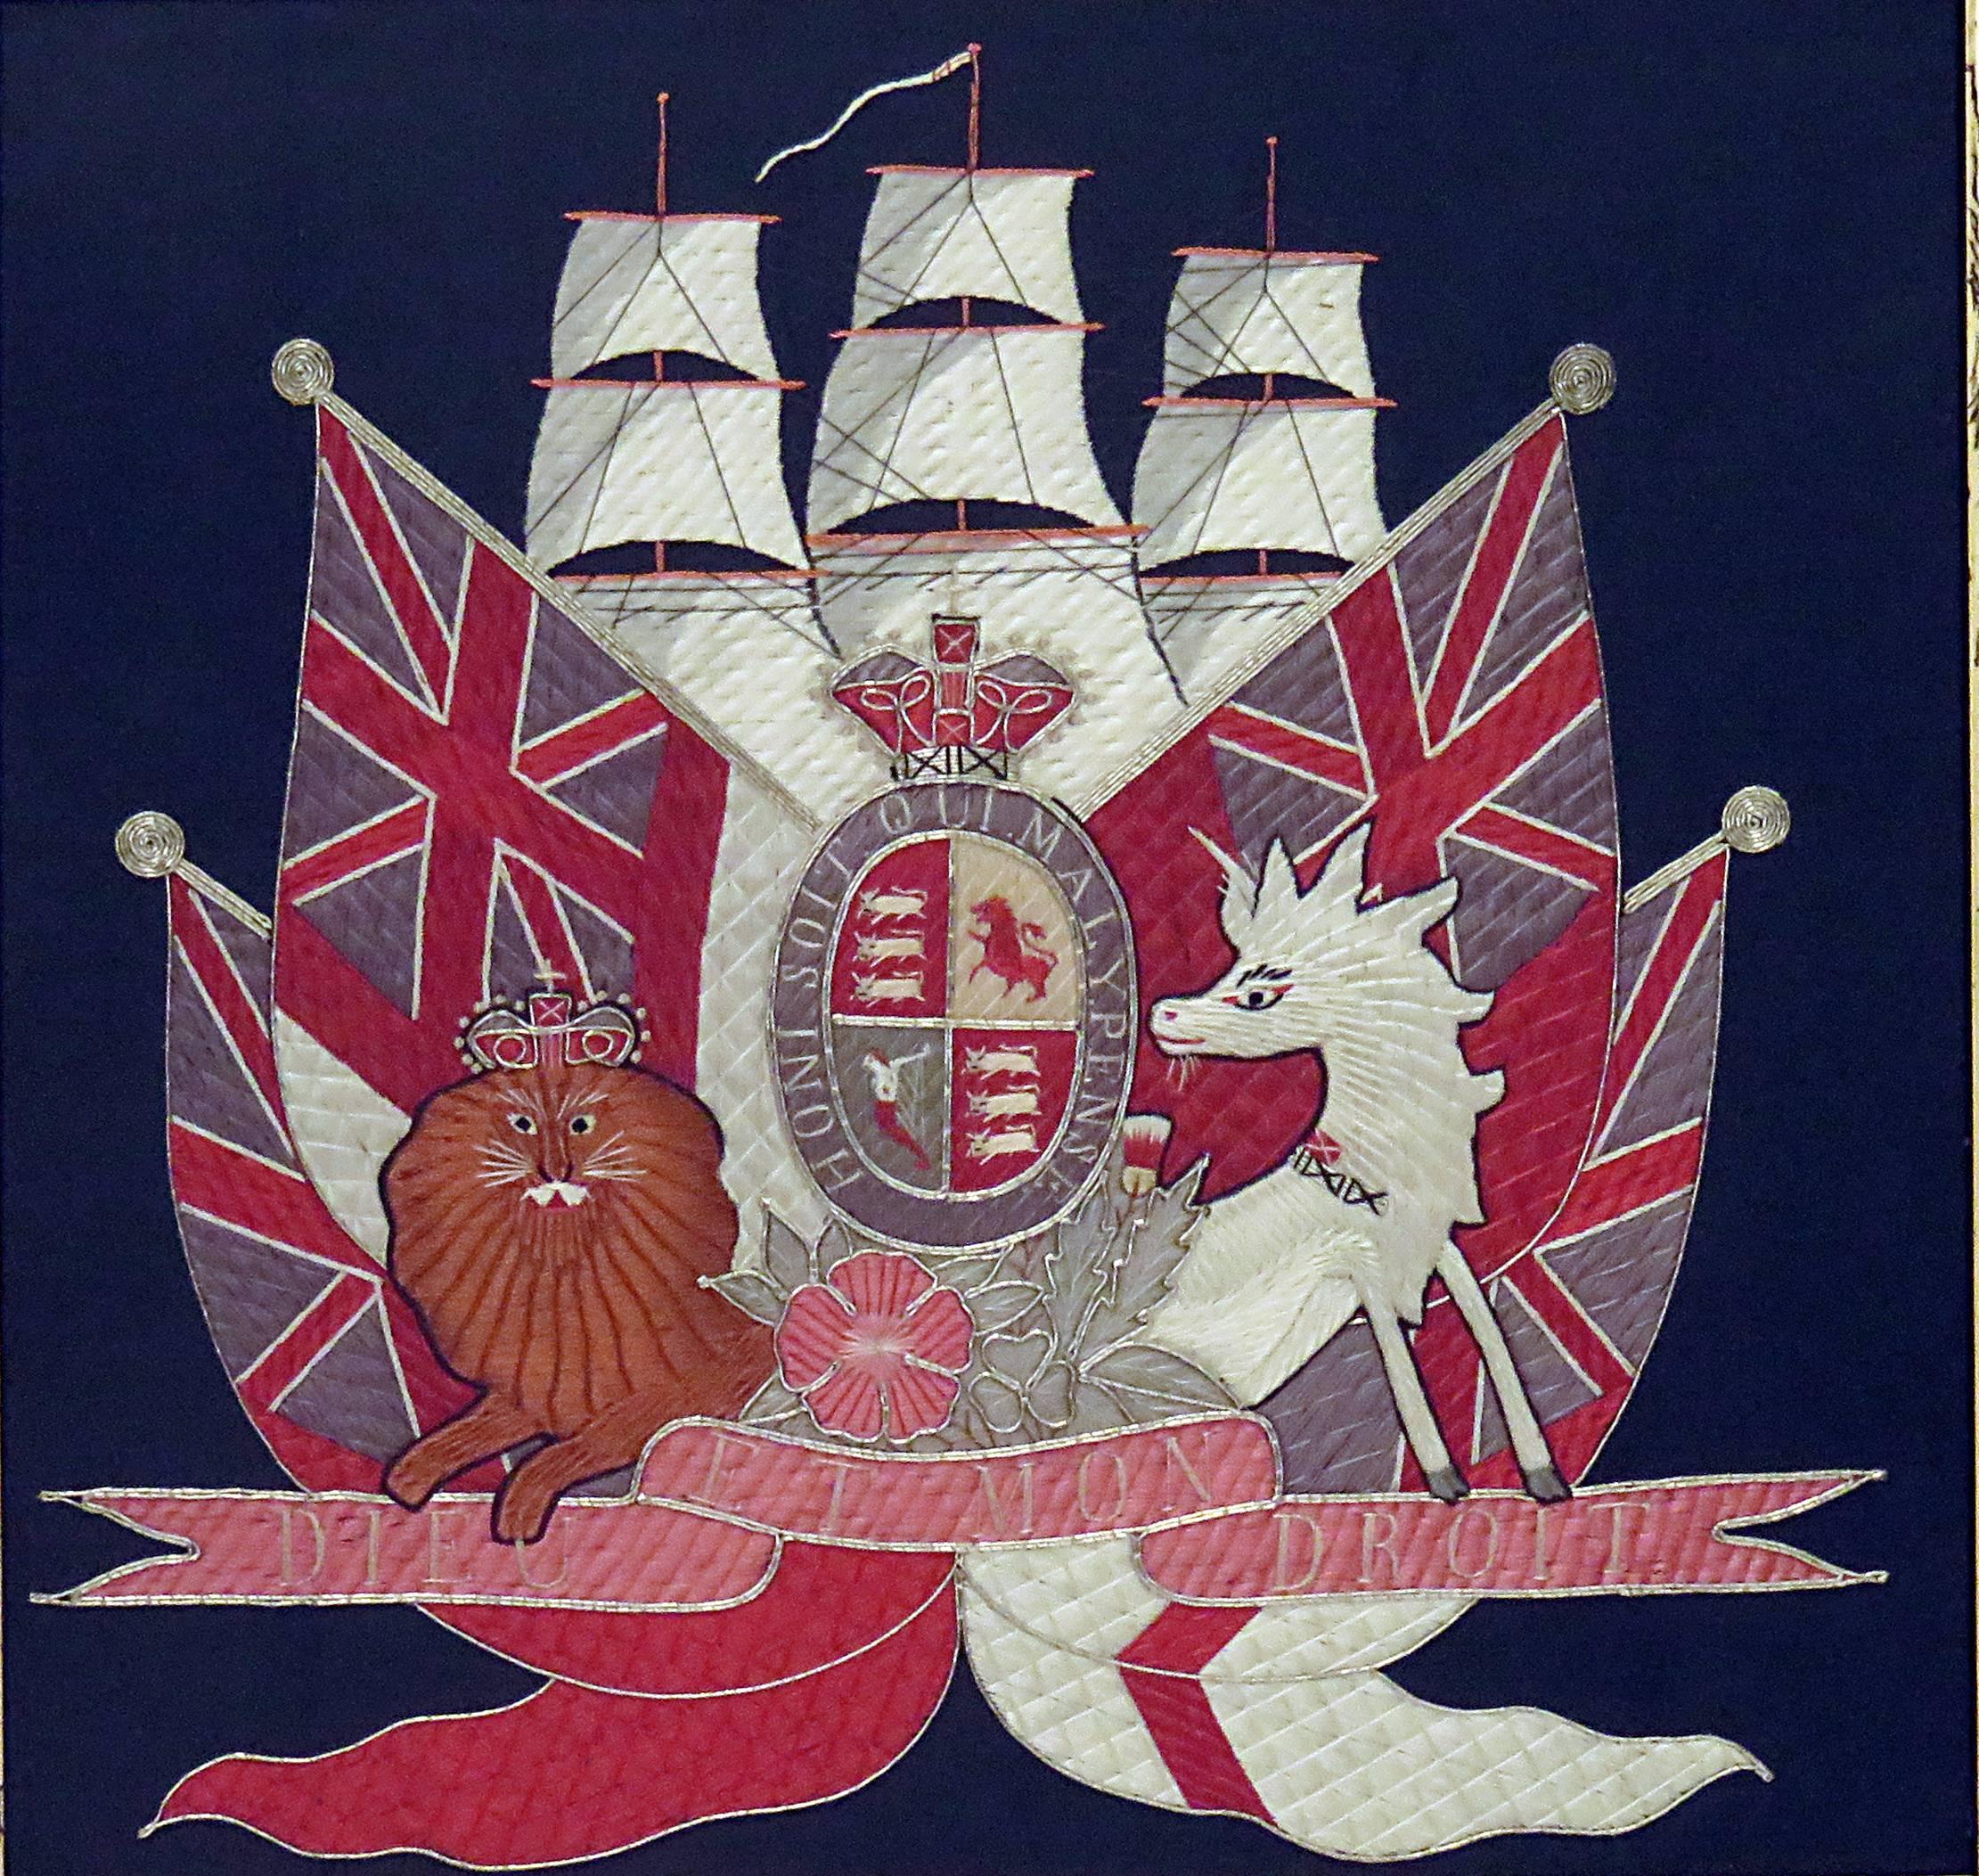 A handsome embroidered picture featuring a British ship under sail with assorted British commonwealth flags. A lion and unicorn frame a cartouche featuring heraldry and the motto of the Order of the Garter. We suspect the work of a talented child as